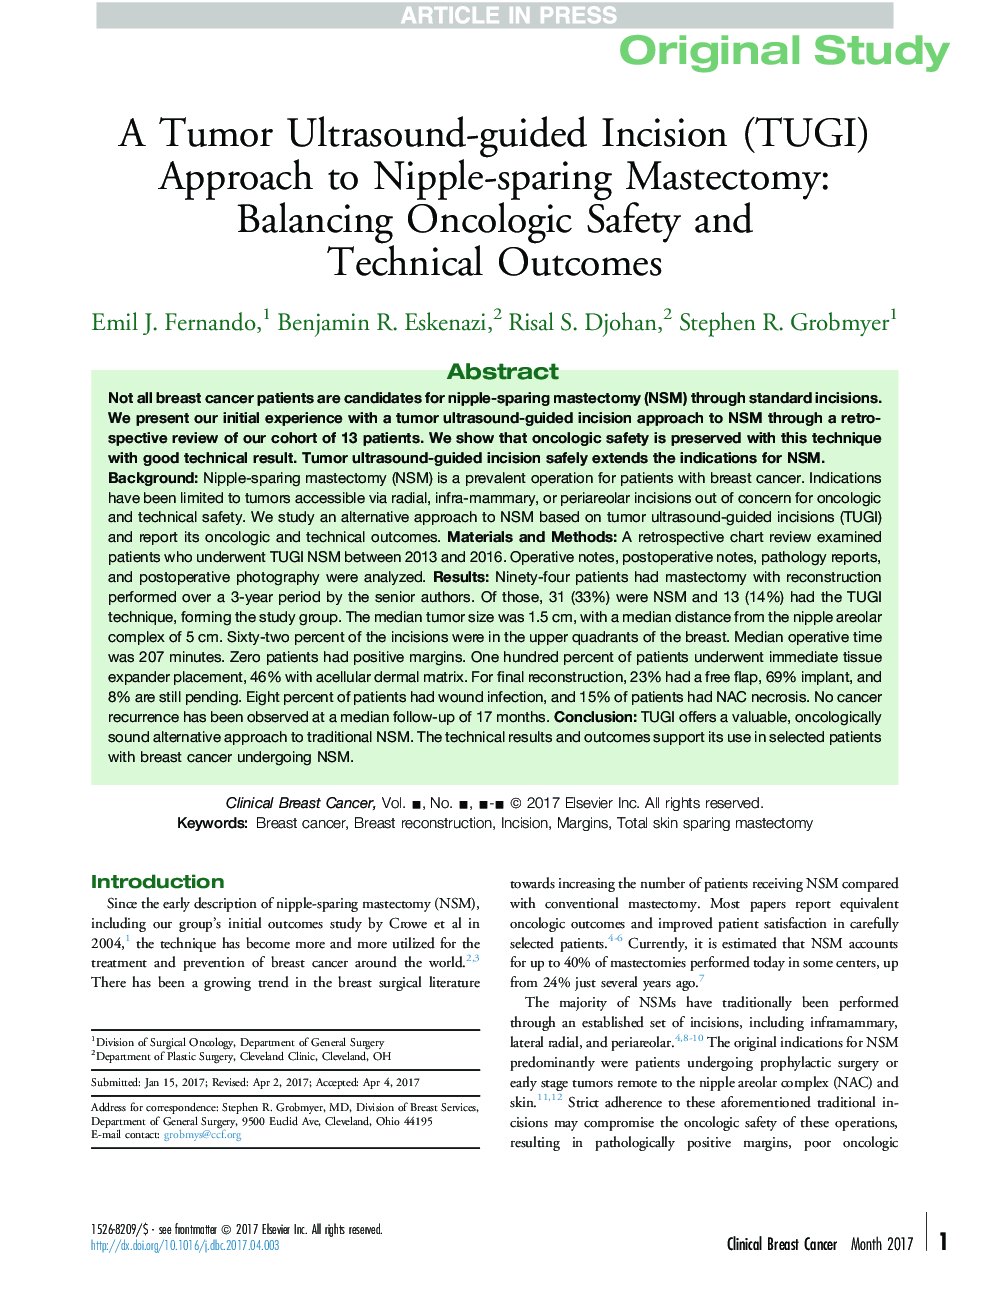 A Tumor Ultrasound-guided Incision (TUGI) Approach to Nipple-sparing Mastectomy: Balancing Oncologic Safety and TechnicalÂ Outcomes